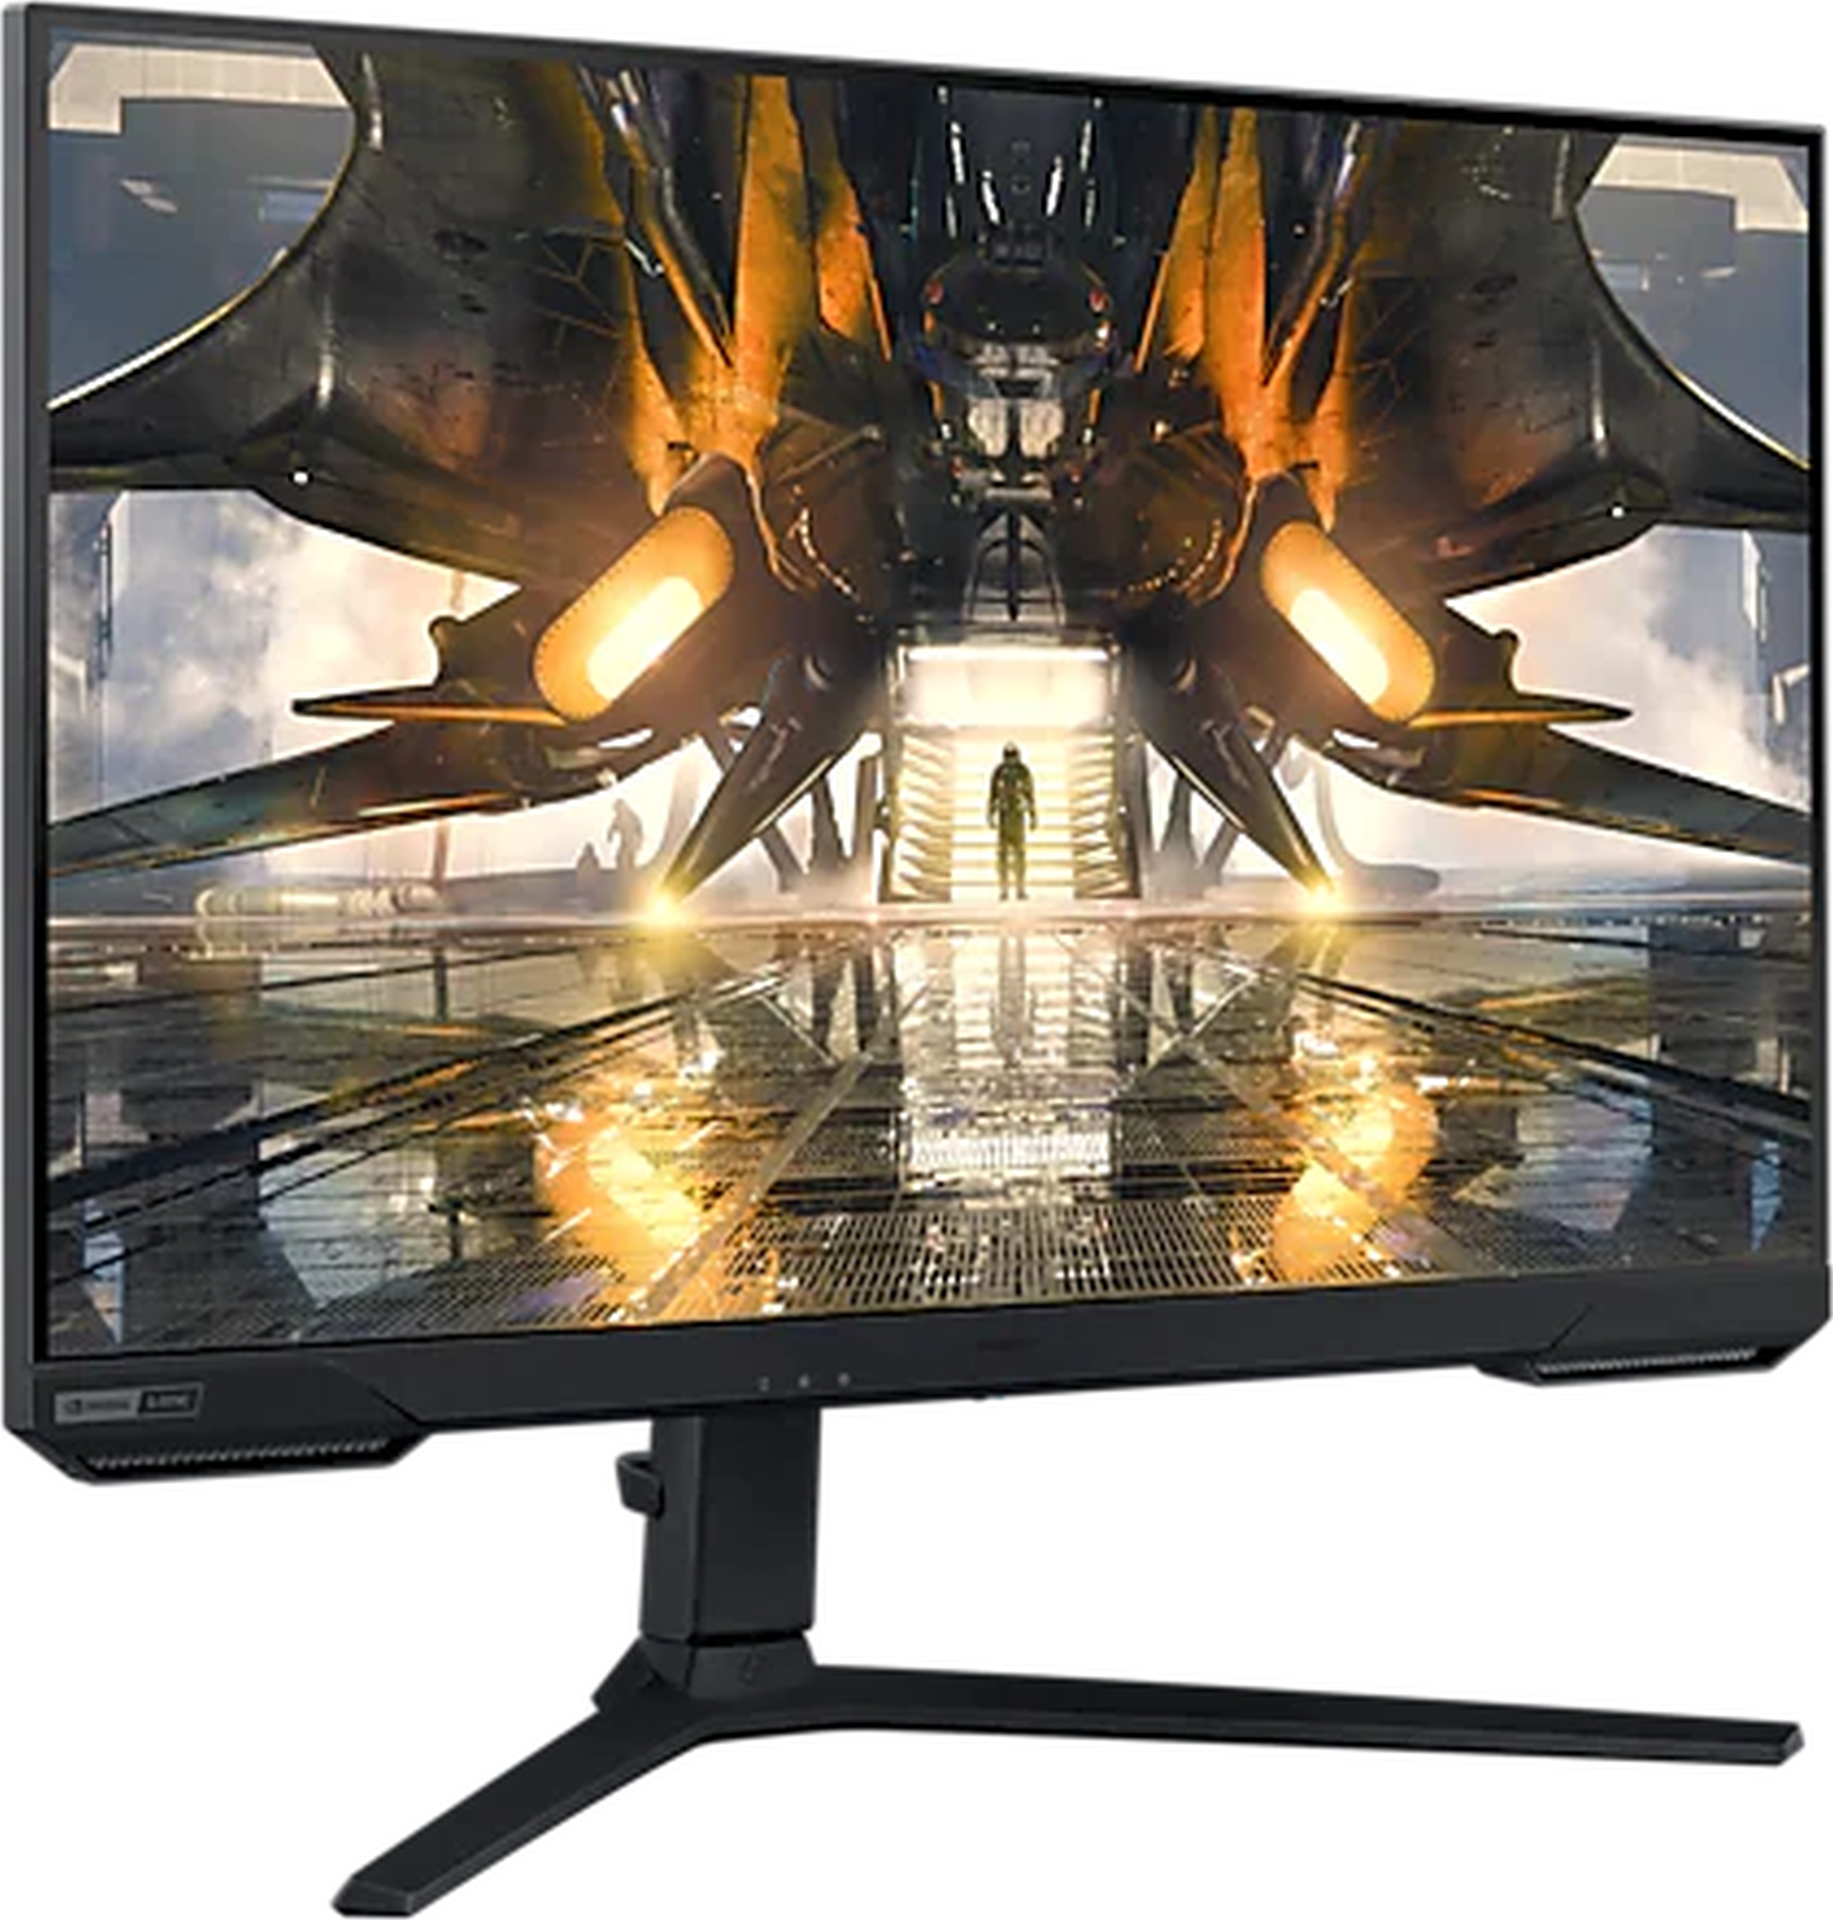 8806092828452 Samsung Odyssey G5, 32'' QHD IPS, 165 Hz S32AG520PU - Gaming Computer & IT,Gaming,Gaming skærme 3400005020 LS32AG520PUXEN